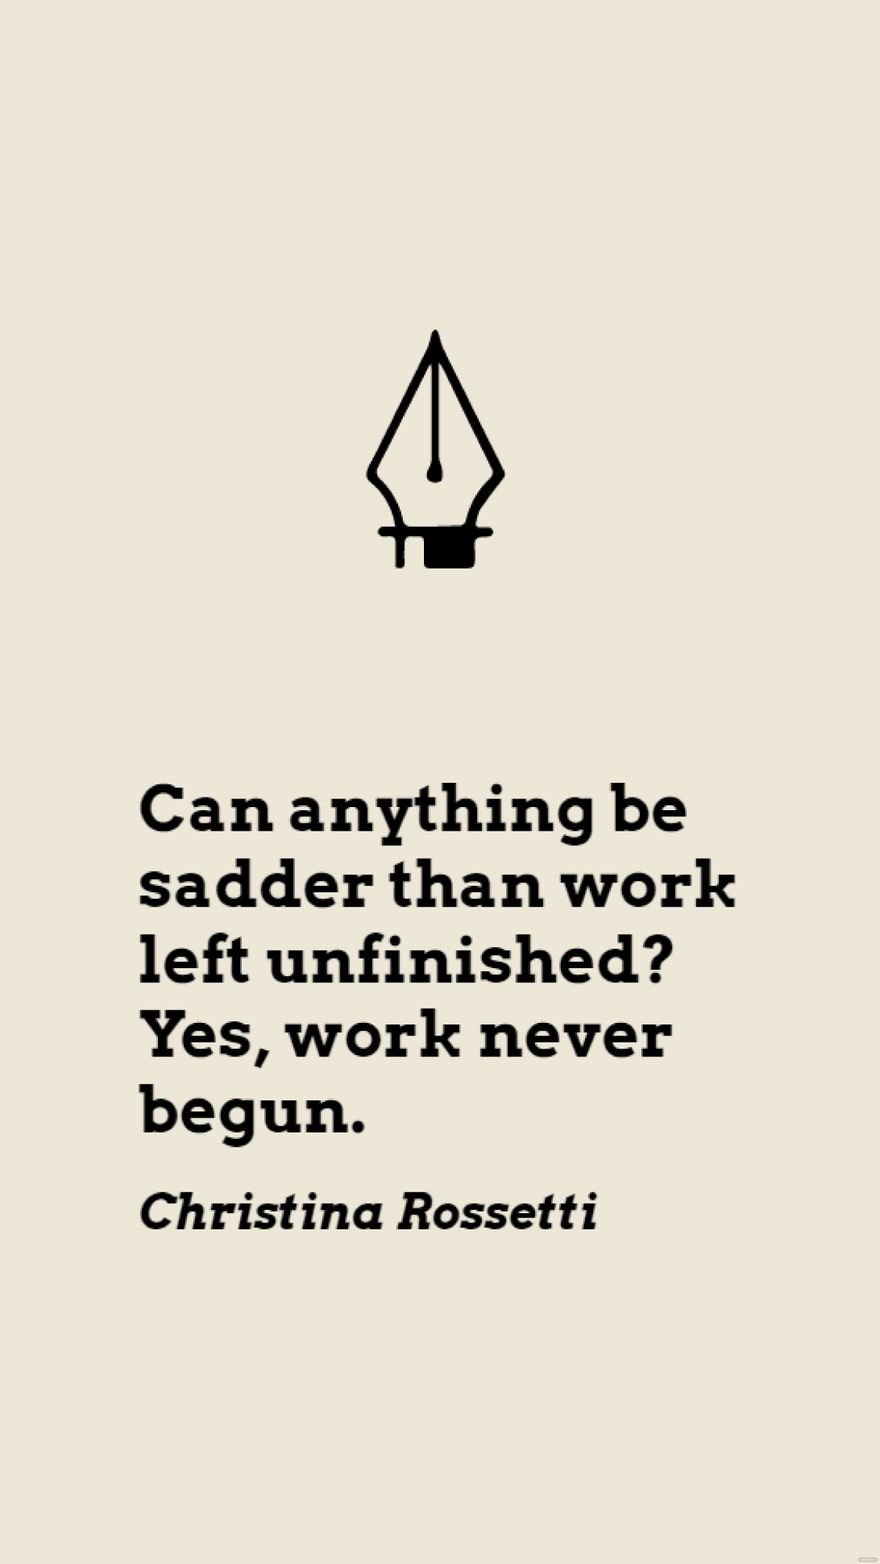 Free Christina Rossetti - Can anything be sadder than work left unfinished? Yes, work never begun.